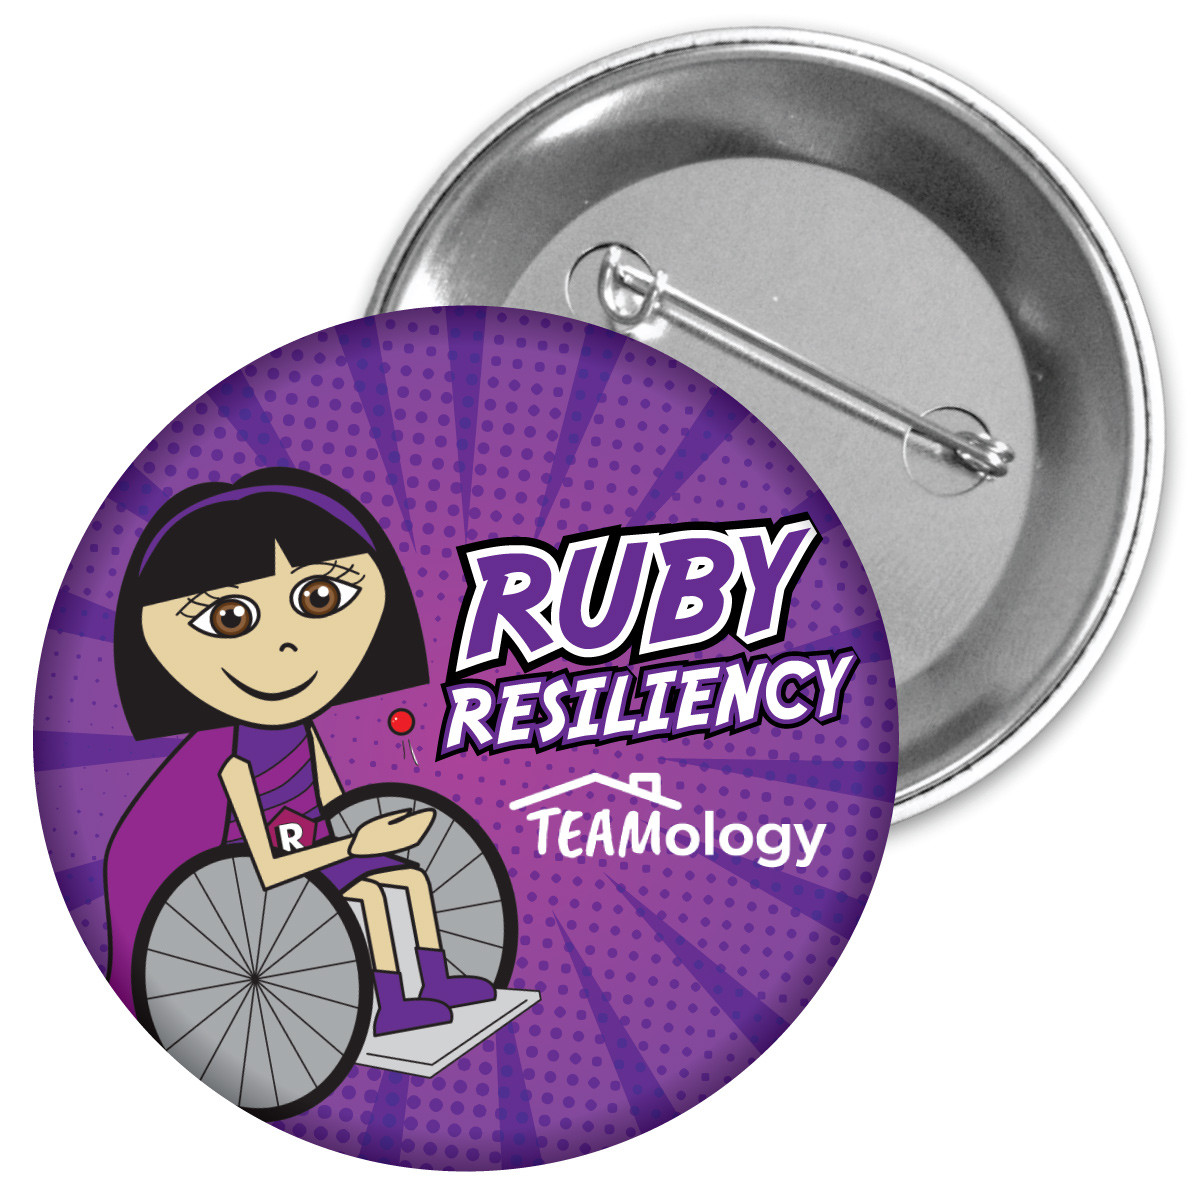 Metal Button - Resiliency (Ruby)